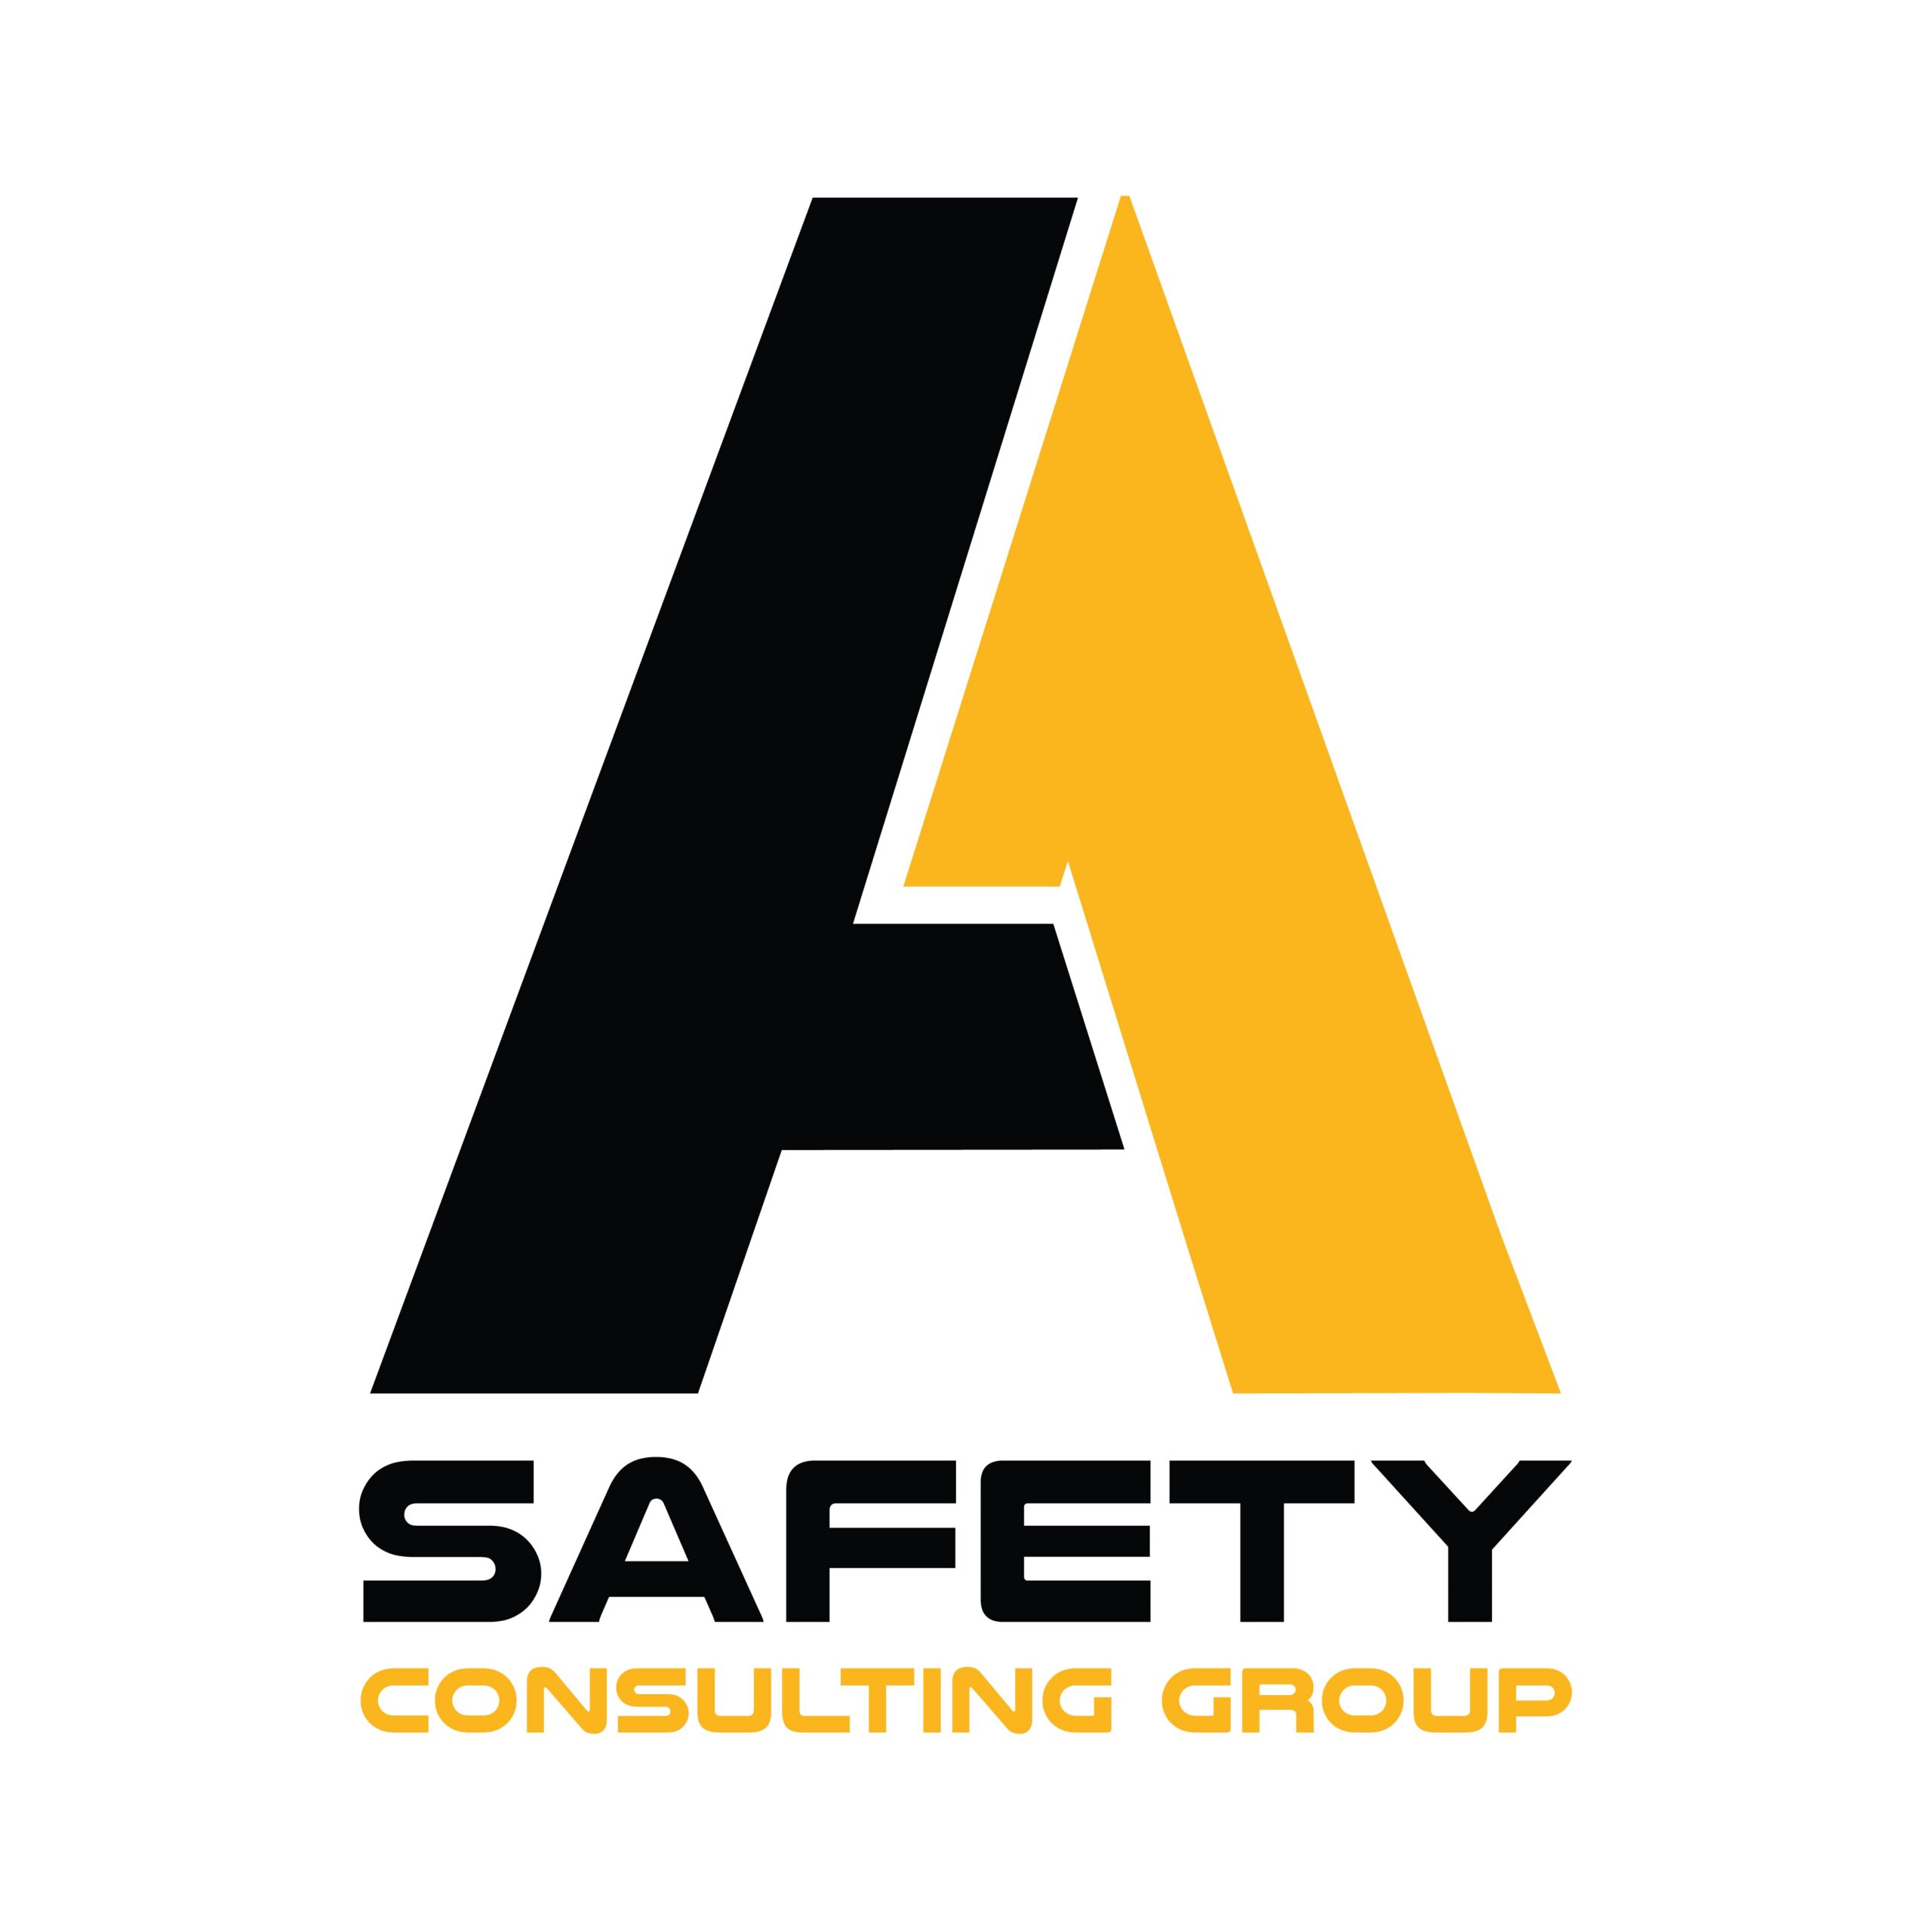 A1 Safety Consultants lettermark logo example